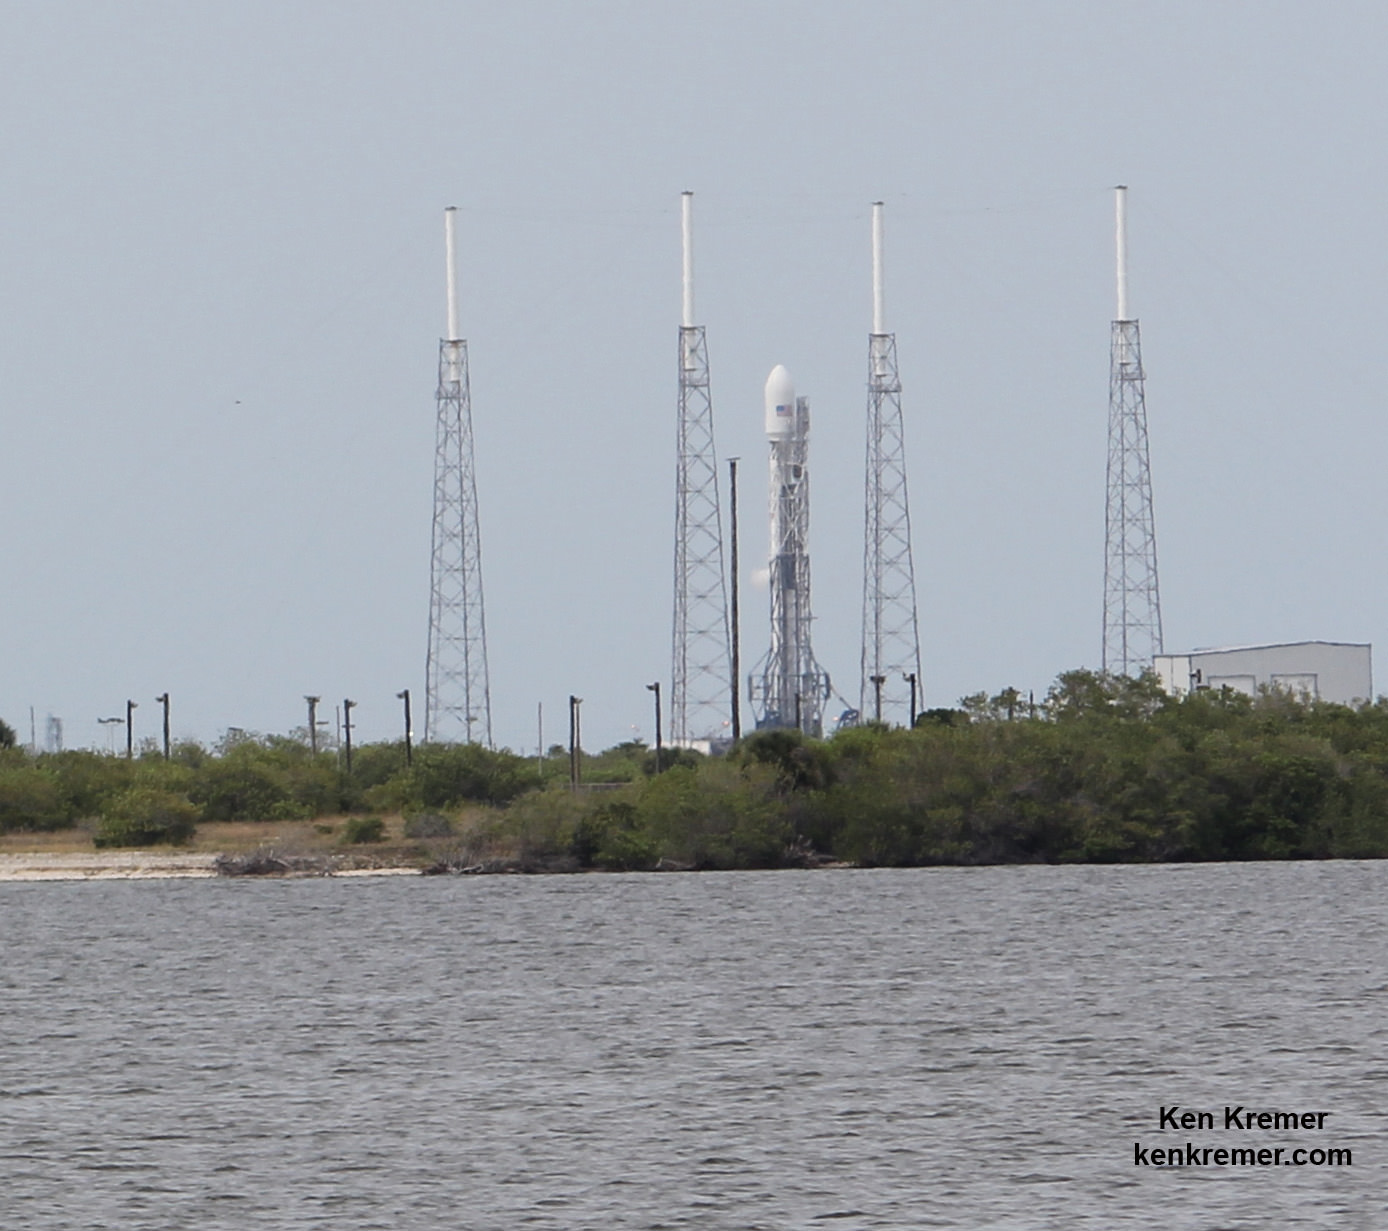 SpaceX Falcon 9 rocket after successful static hot-fire test on June 13, 2014 on Pad 40 at Cape Canaveral, FL.  Launch is slated for Friday, June 20, 2014  on ORBCOMM OG2 mission with six OG2 satellites. Credit: Ken Kremer/kenkremer.com